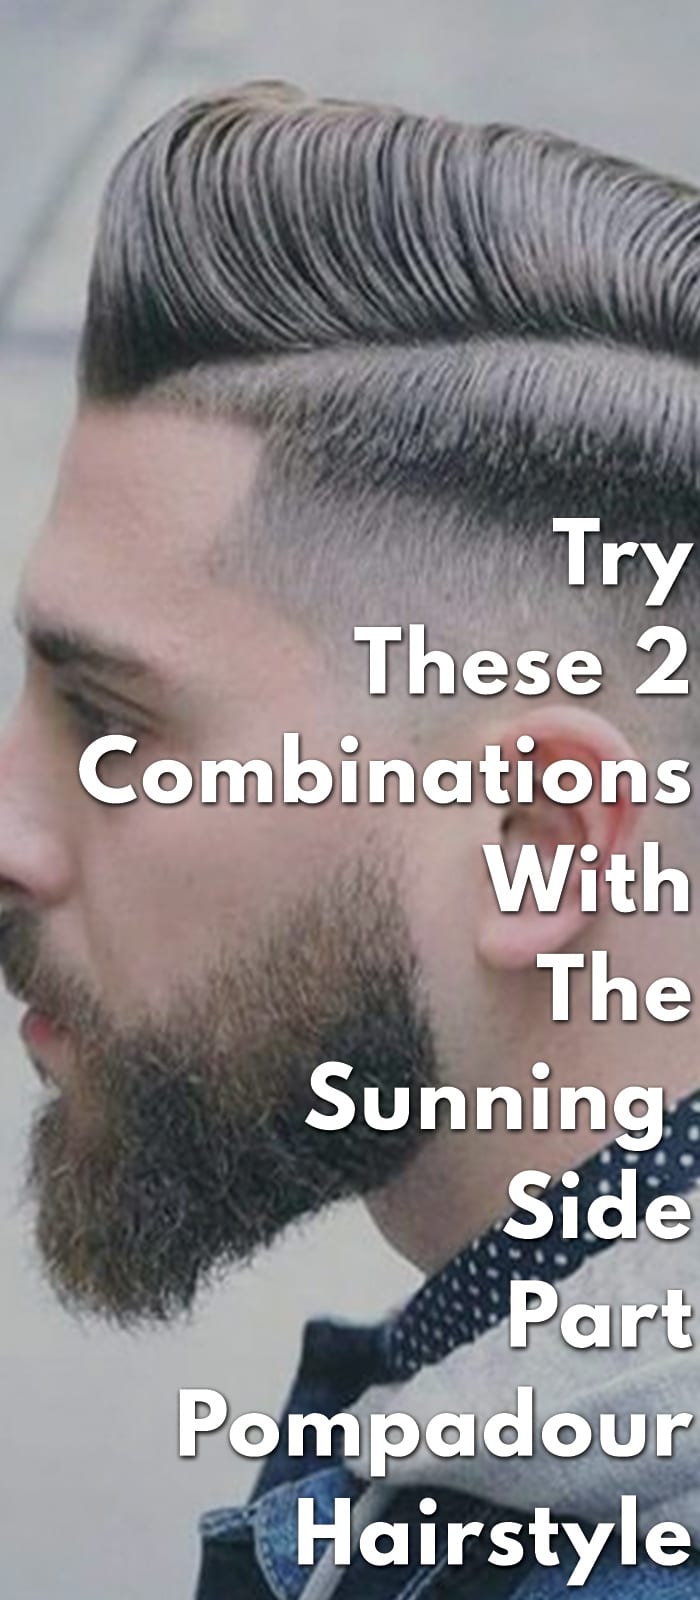 Try These 2 Combinations With The Sunning Side Part Pompadour Hairstyle